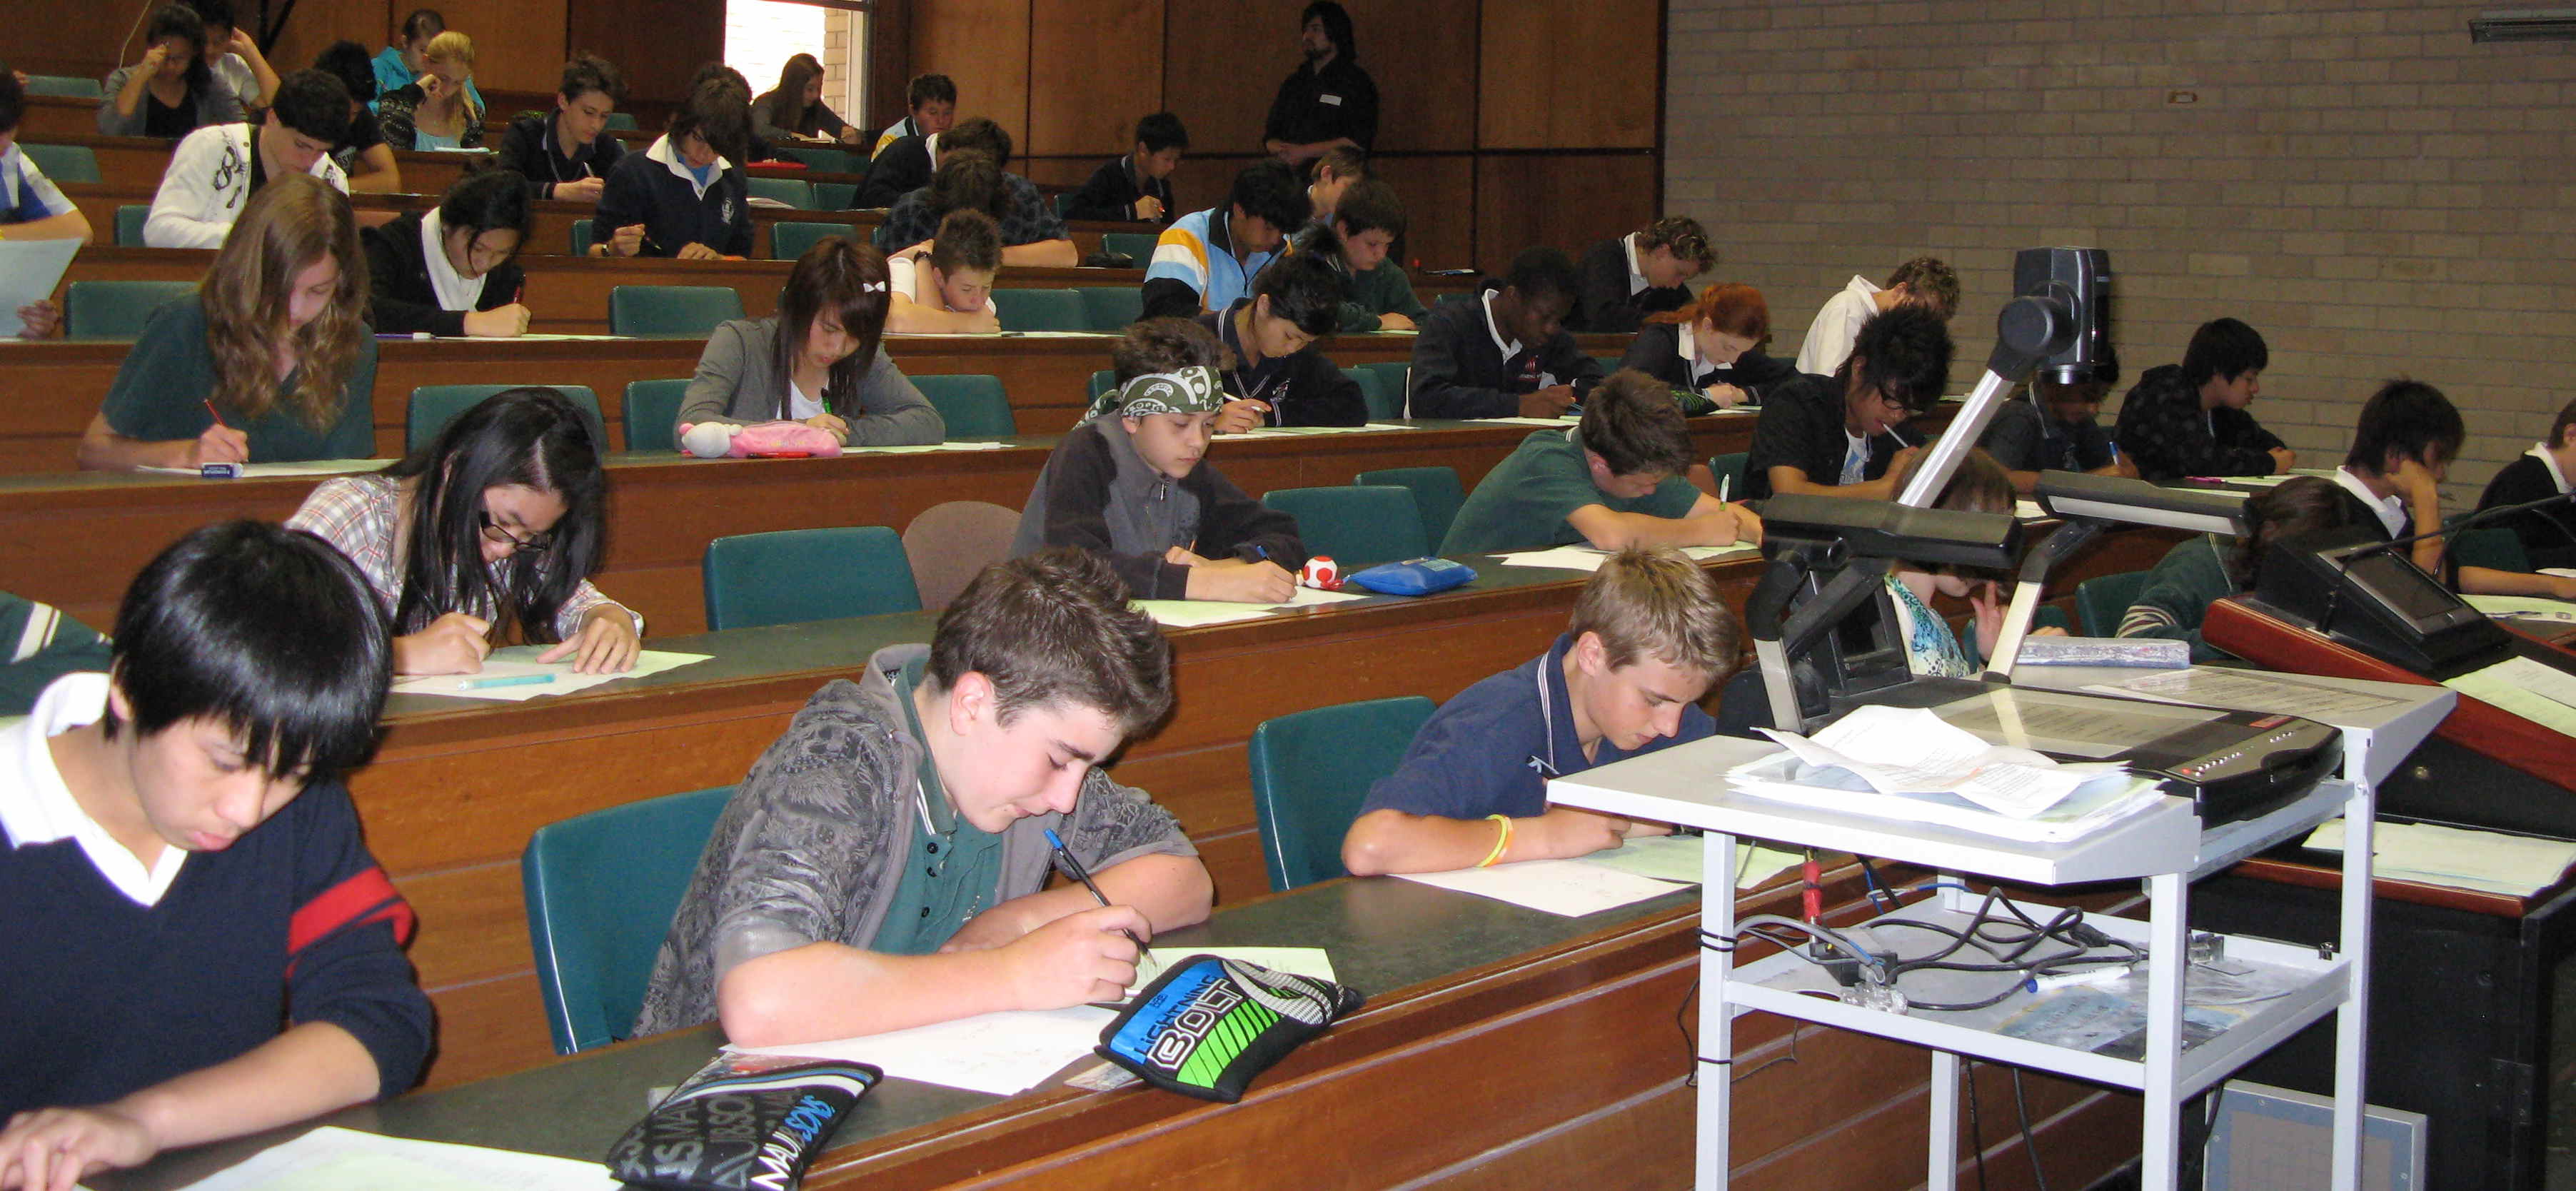 WAJO 2010: Individual Competition in Blakers Lecture Theatre